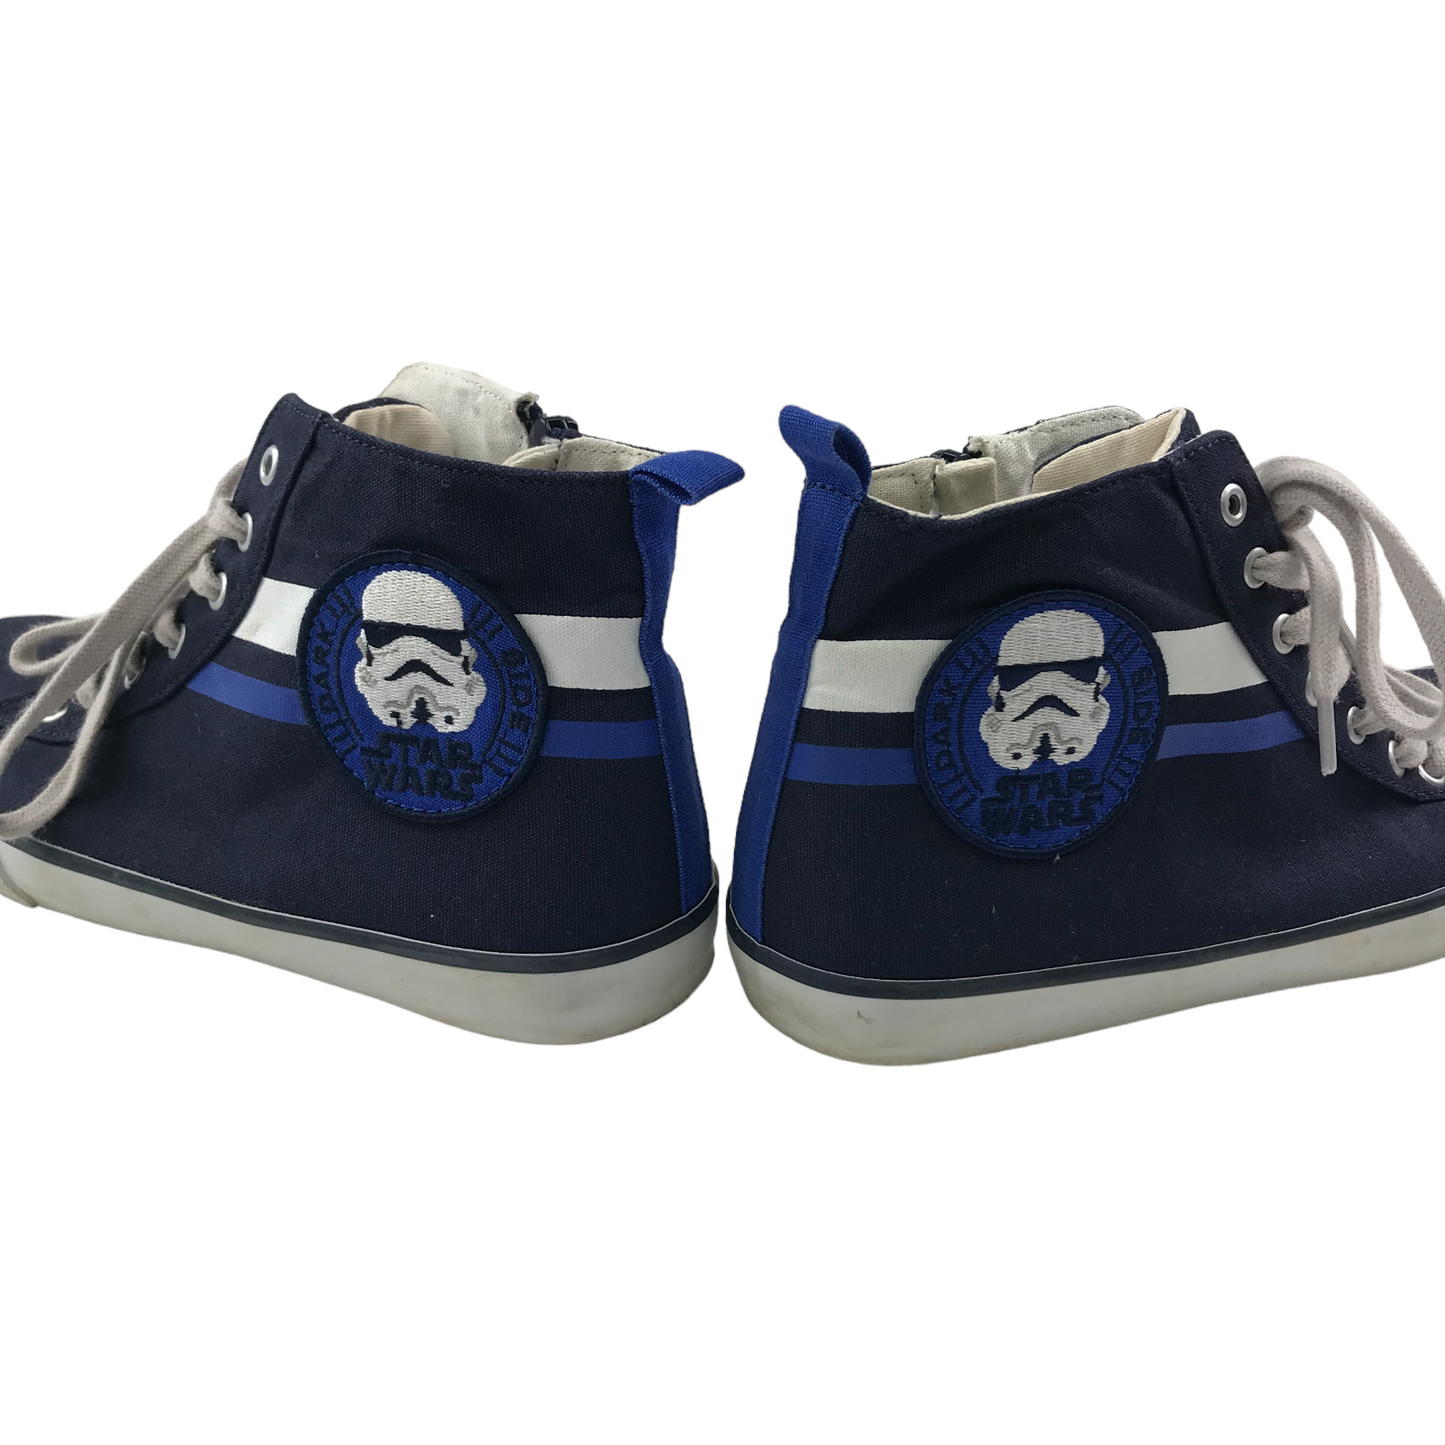 GAP Star Wars Trainers Shoe Size 3 Navy High Tops Trainers